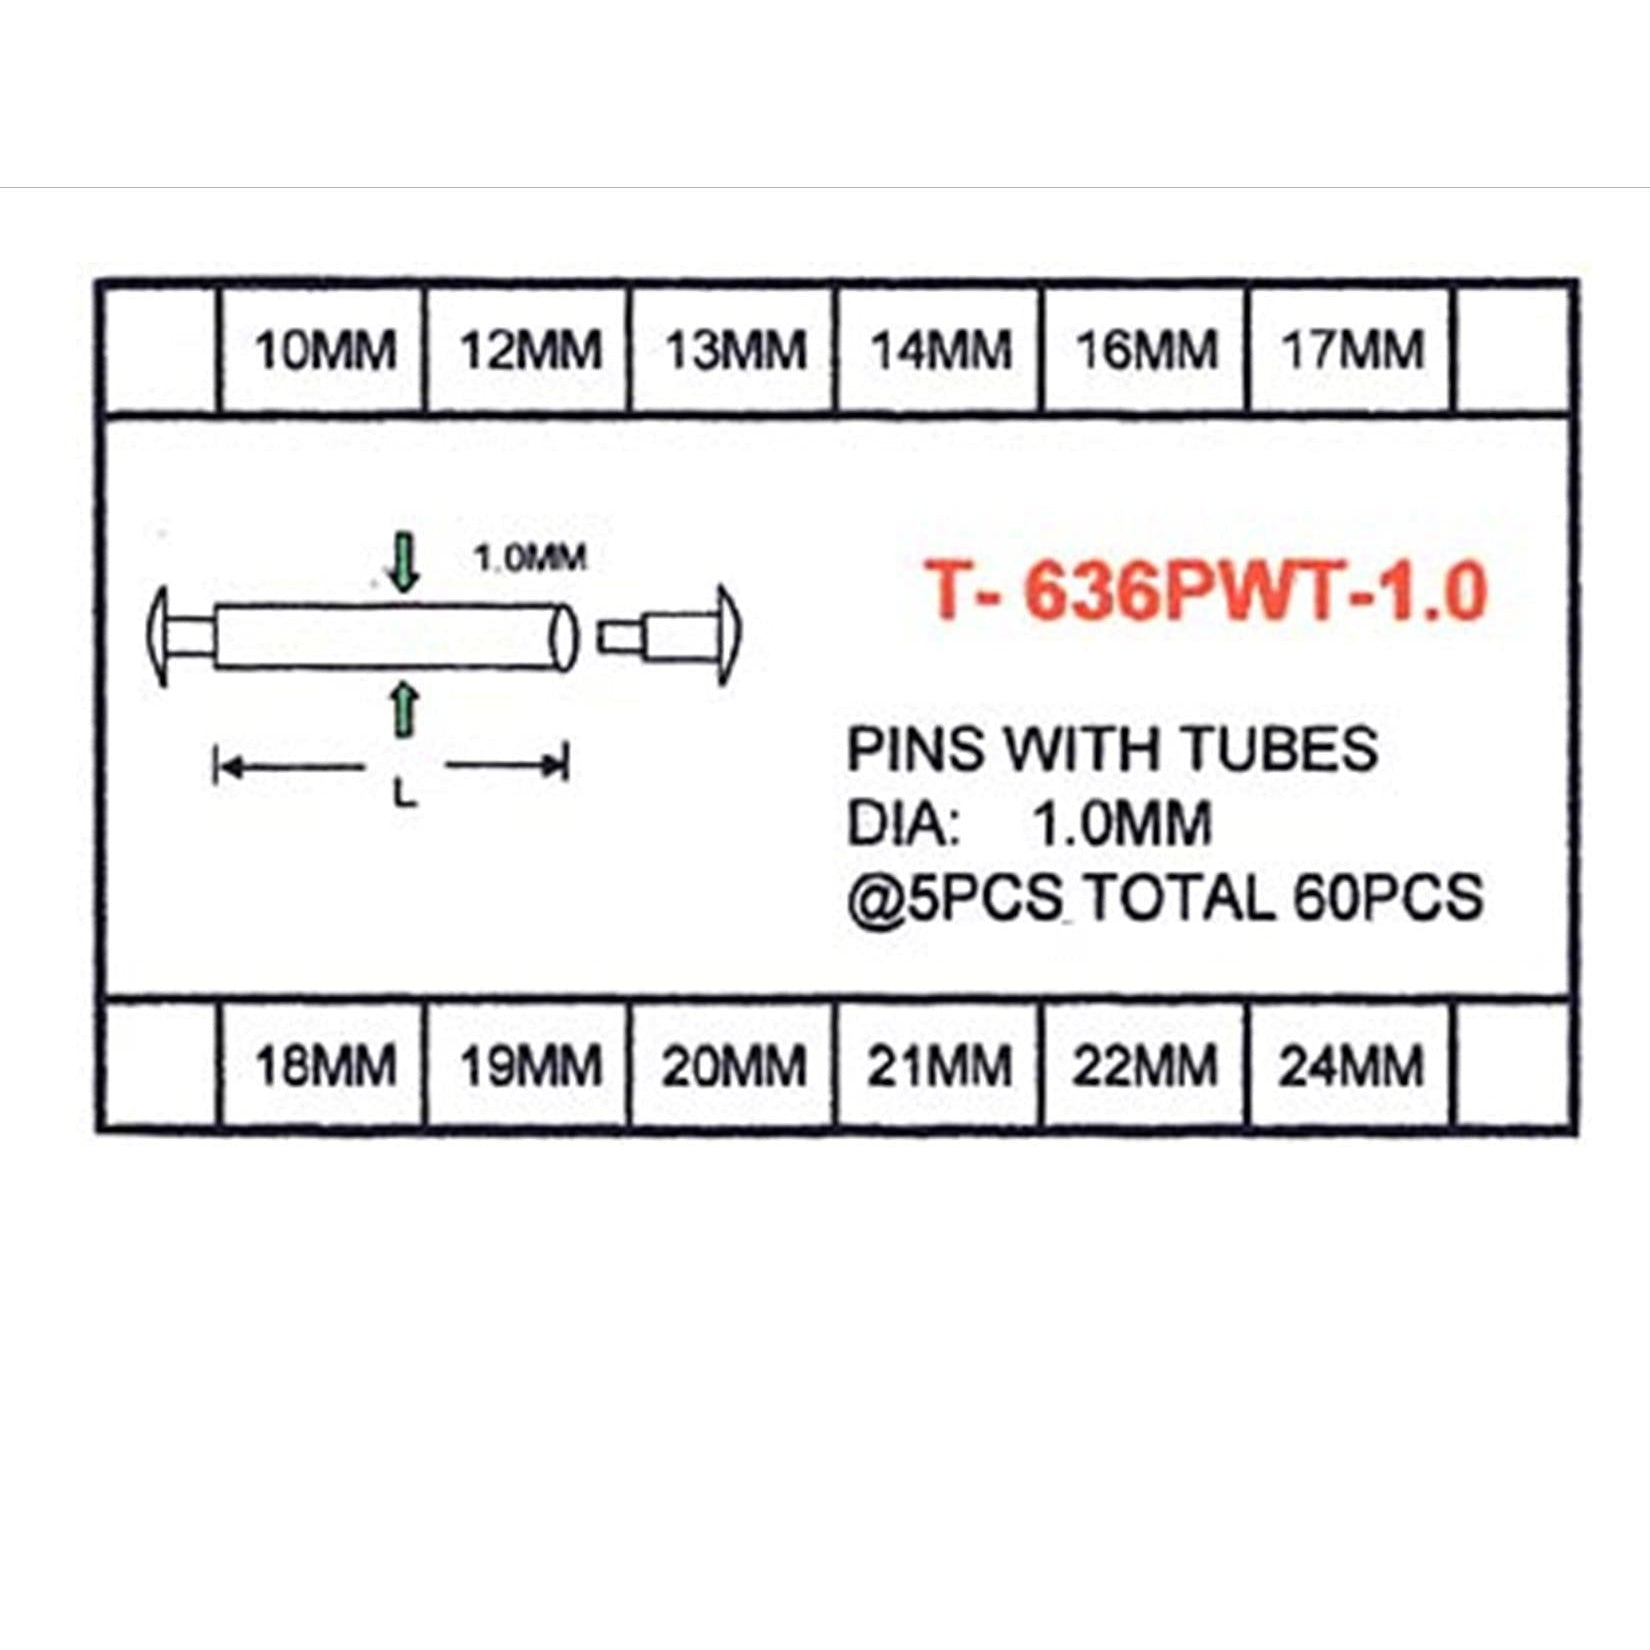 PINS WITH TUBE KIT #636PWT